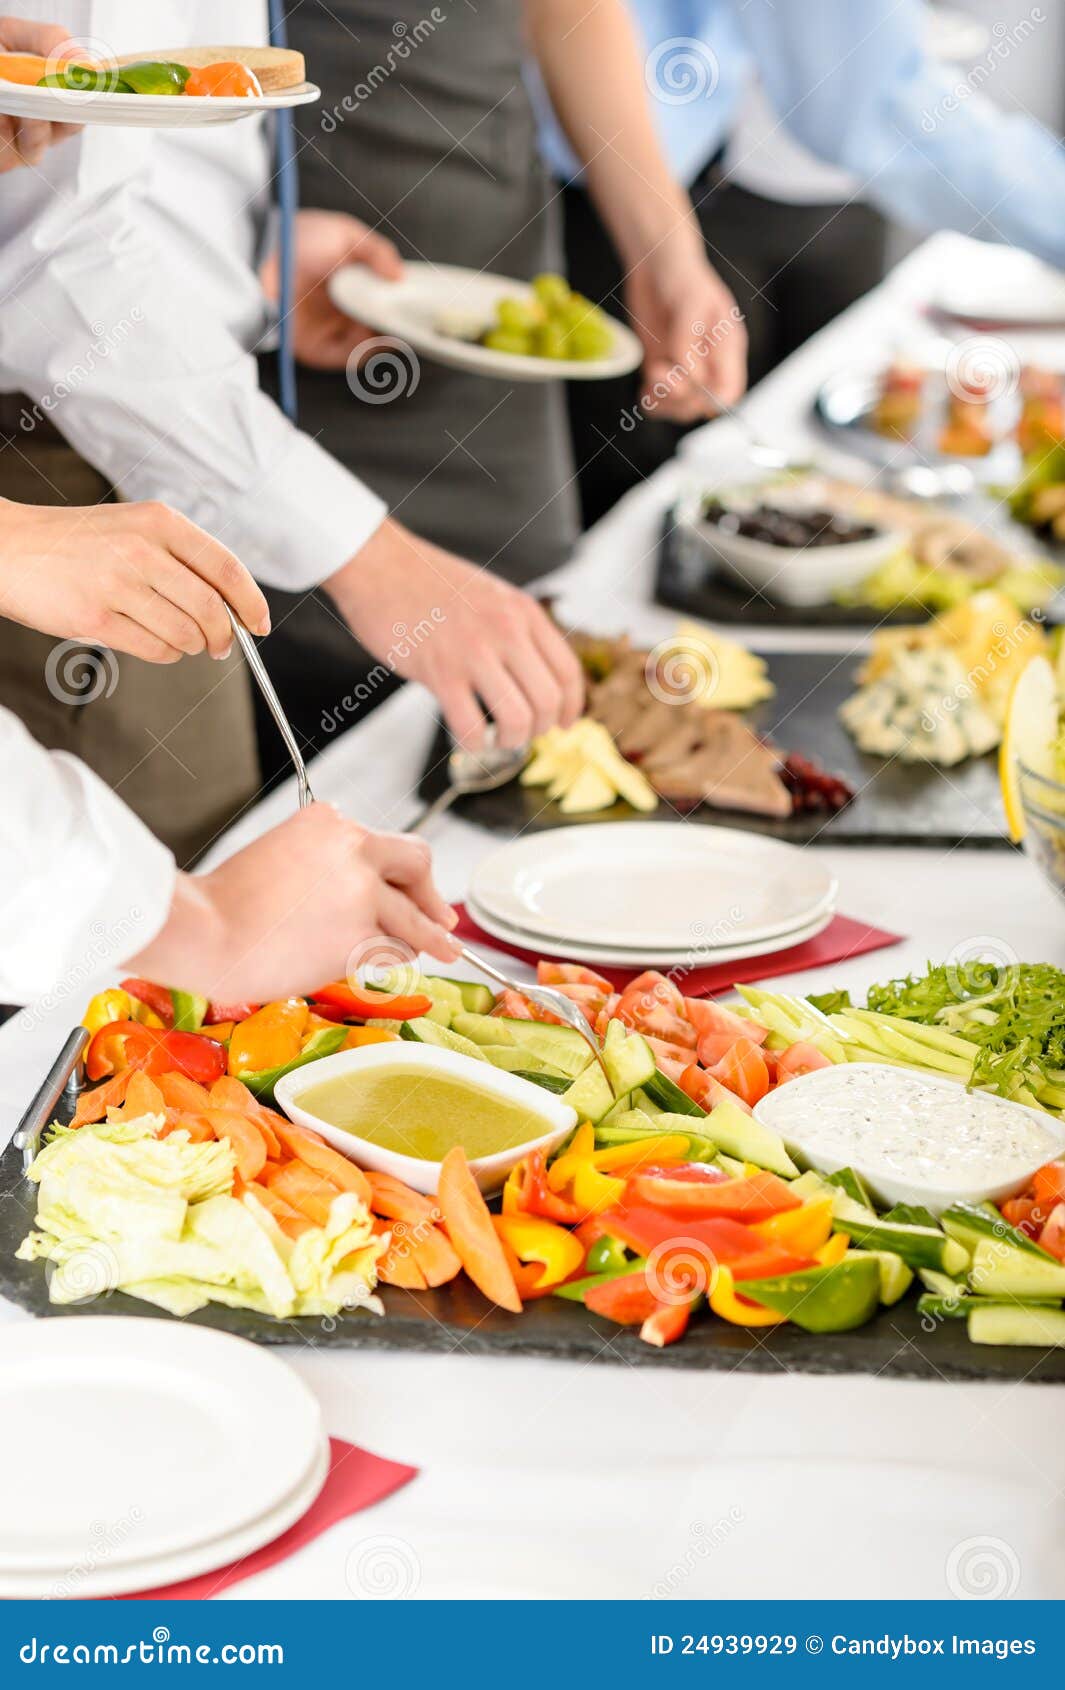 Business Catering People Take Buffet Food Royalty Free Stock Images